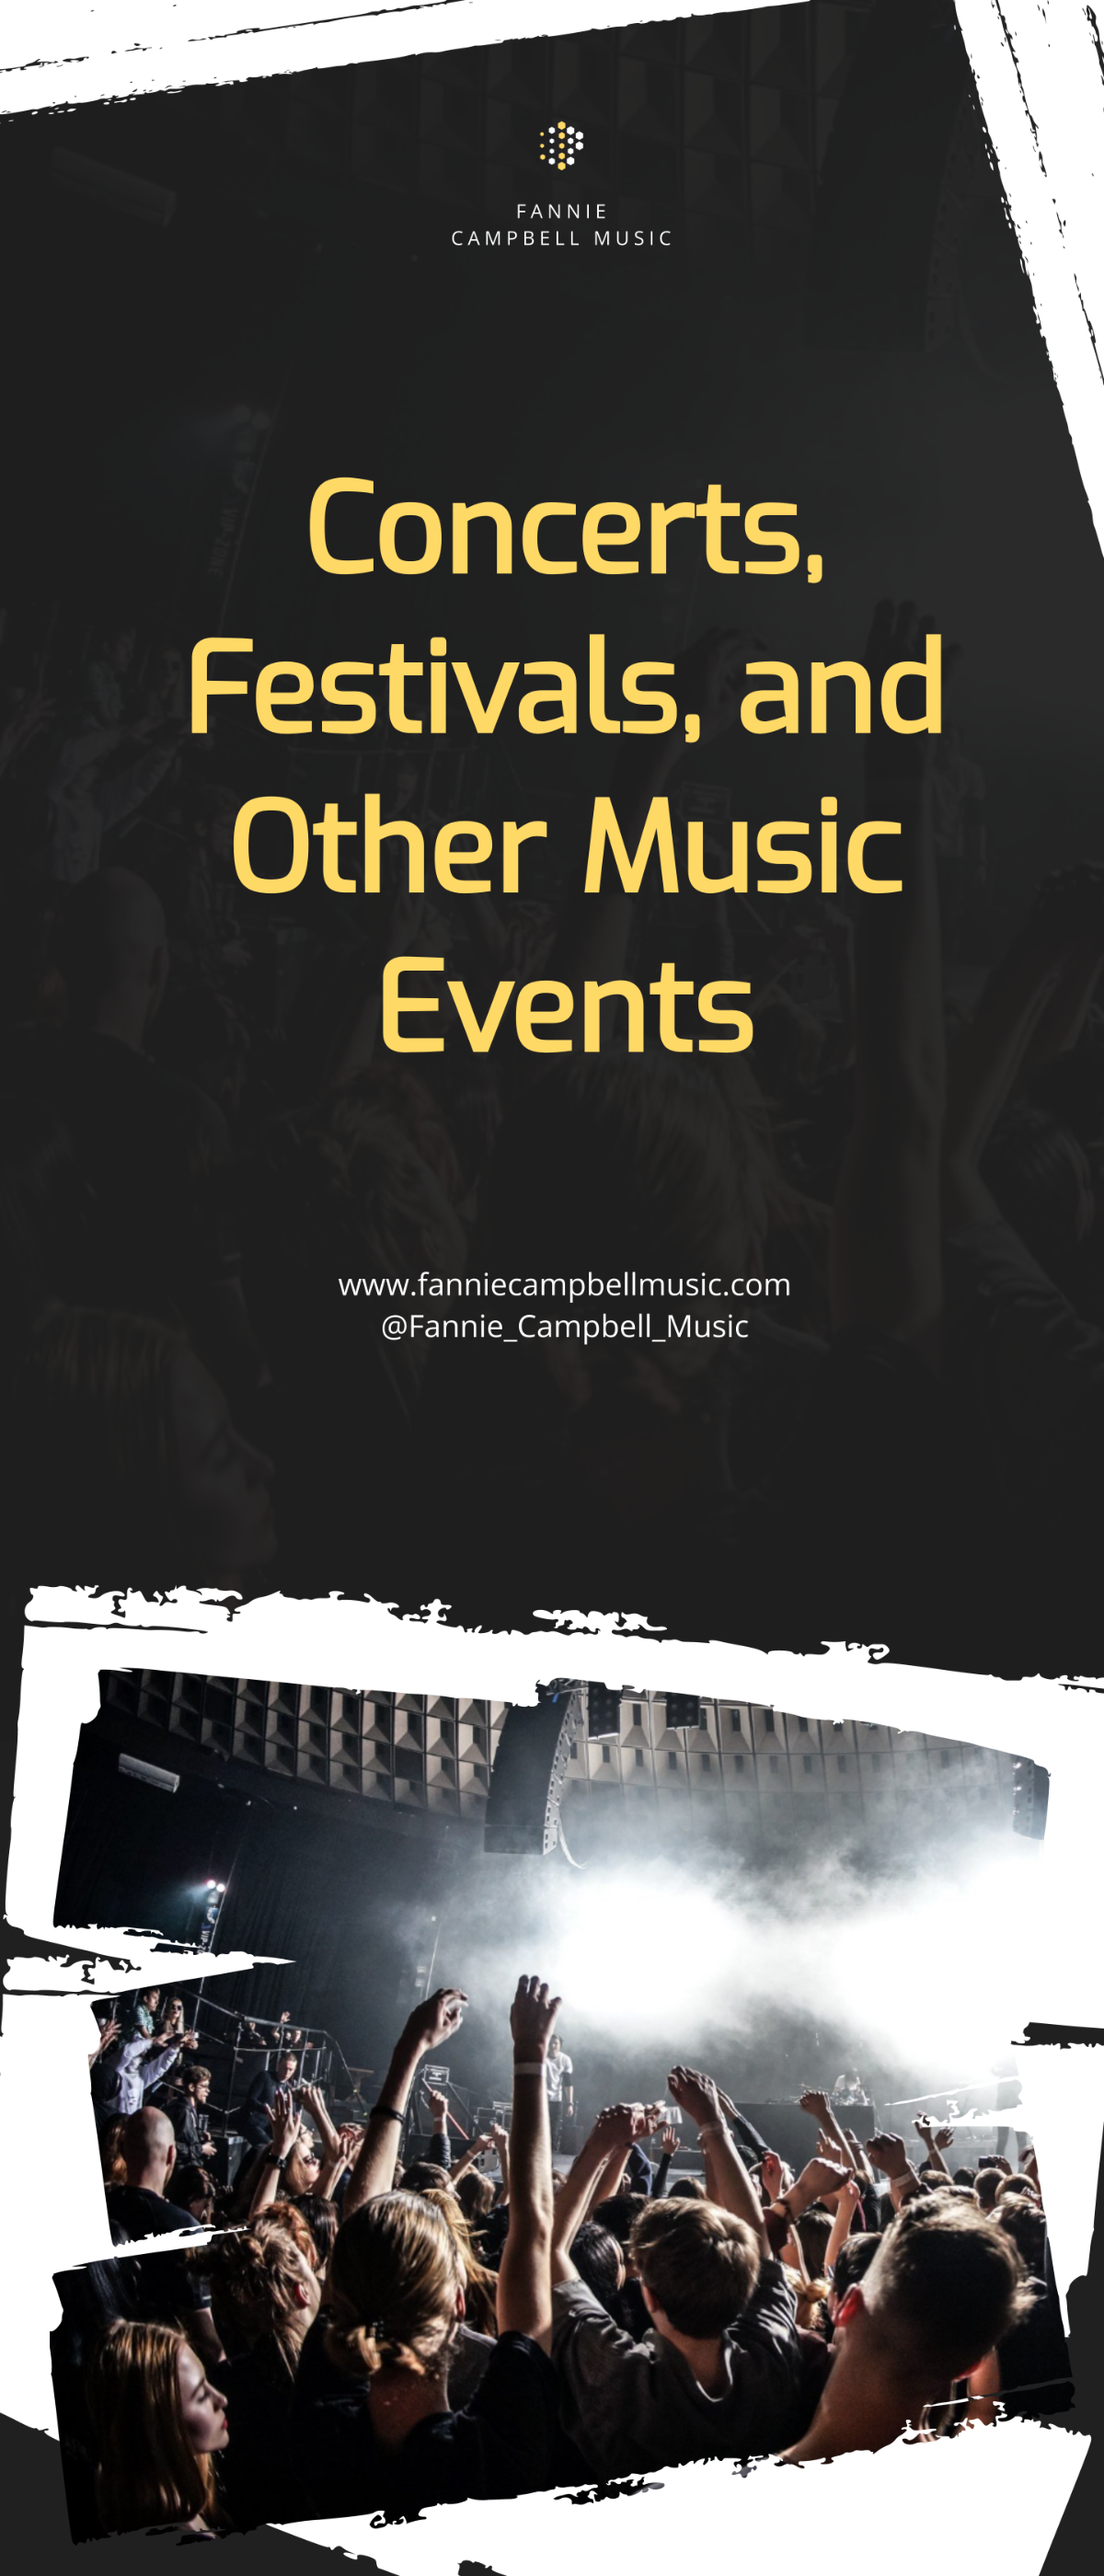 Free Music Roll Up Banner Template